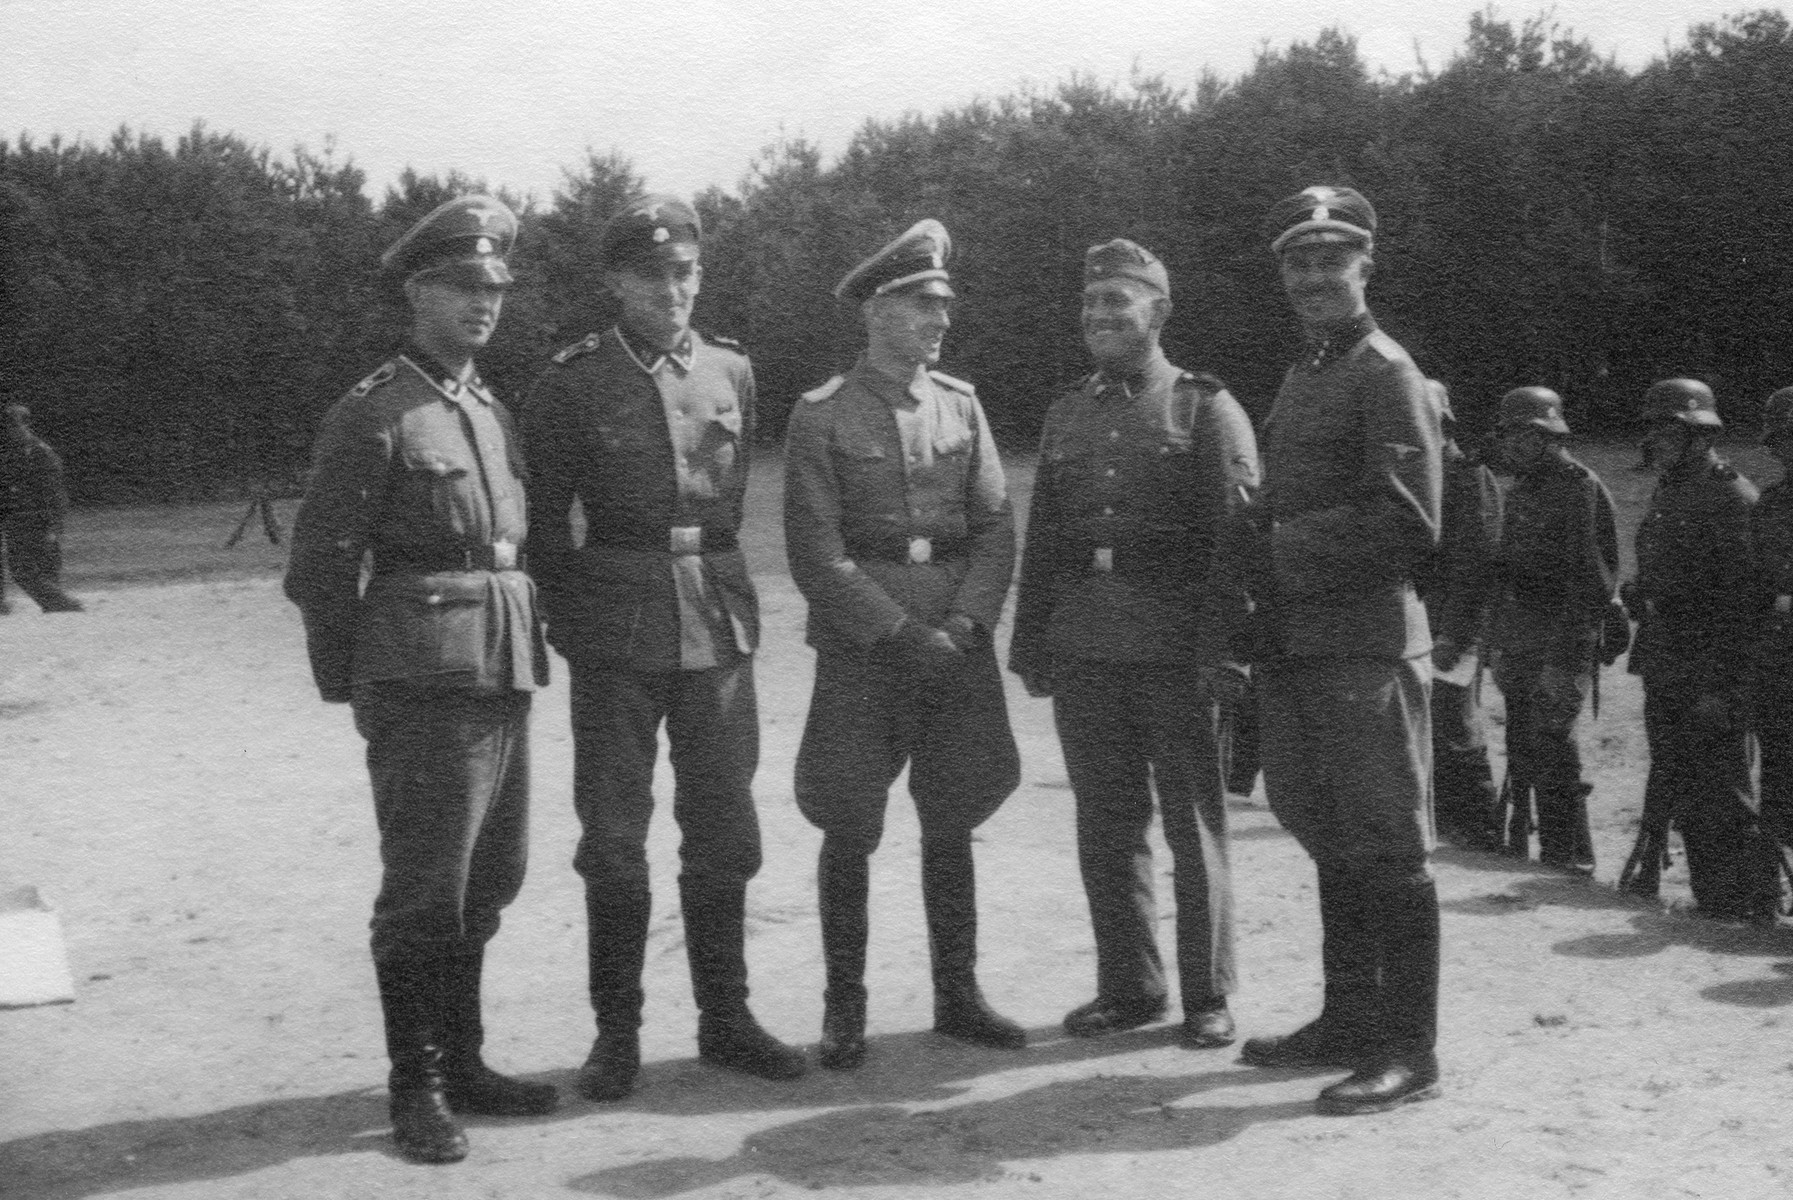 Members of the Waffen-SS in occupied Poland.